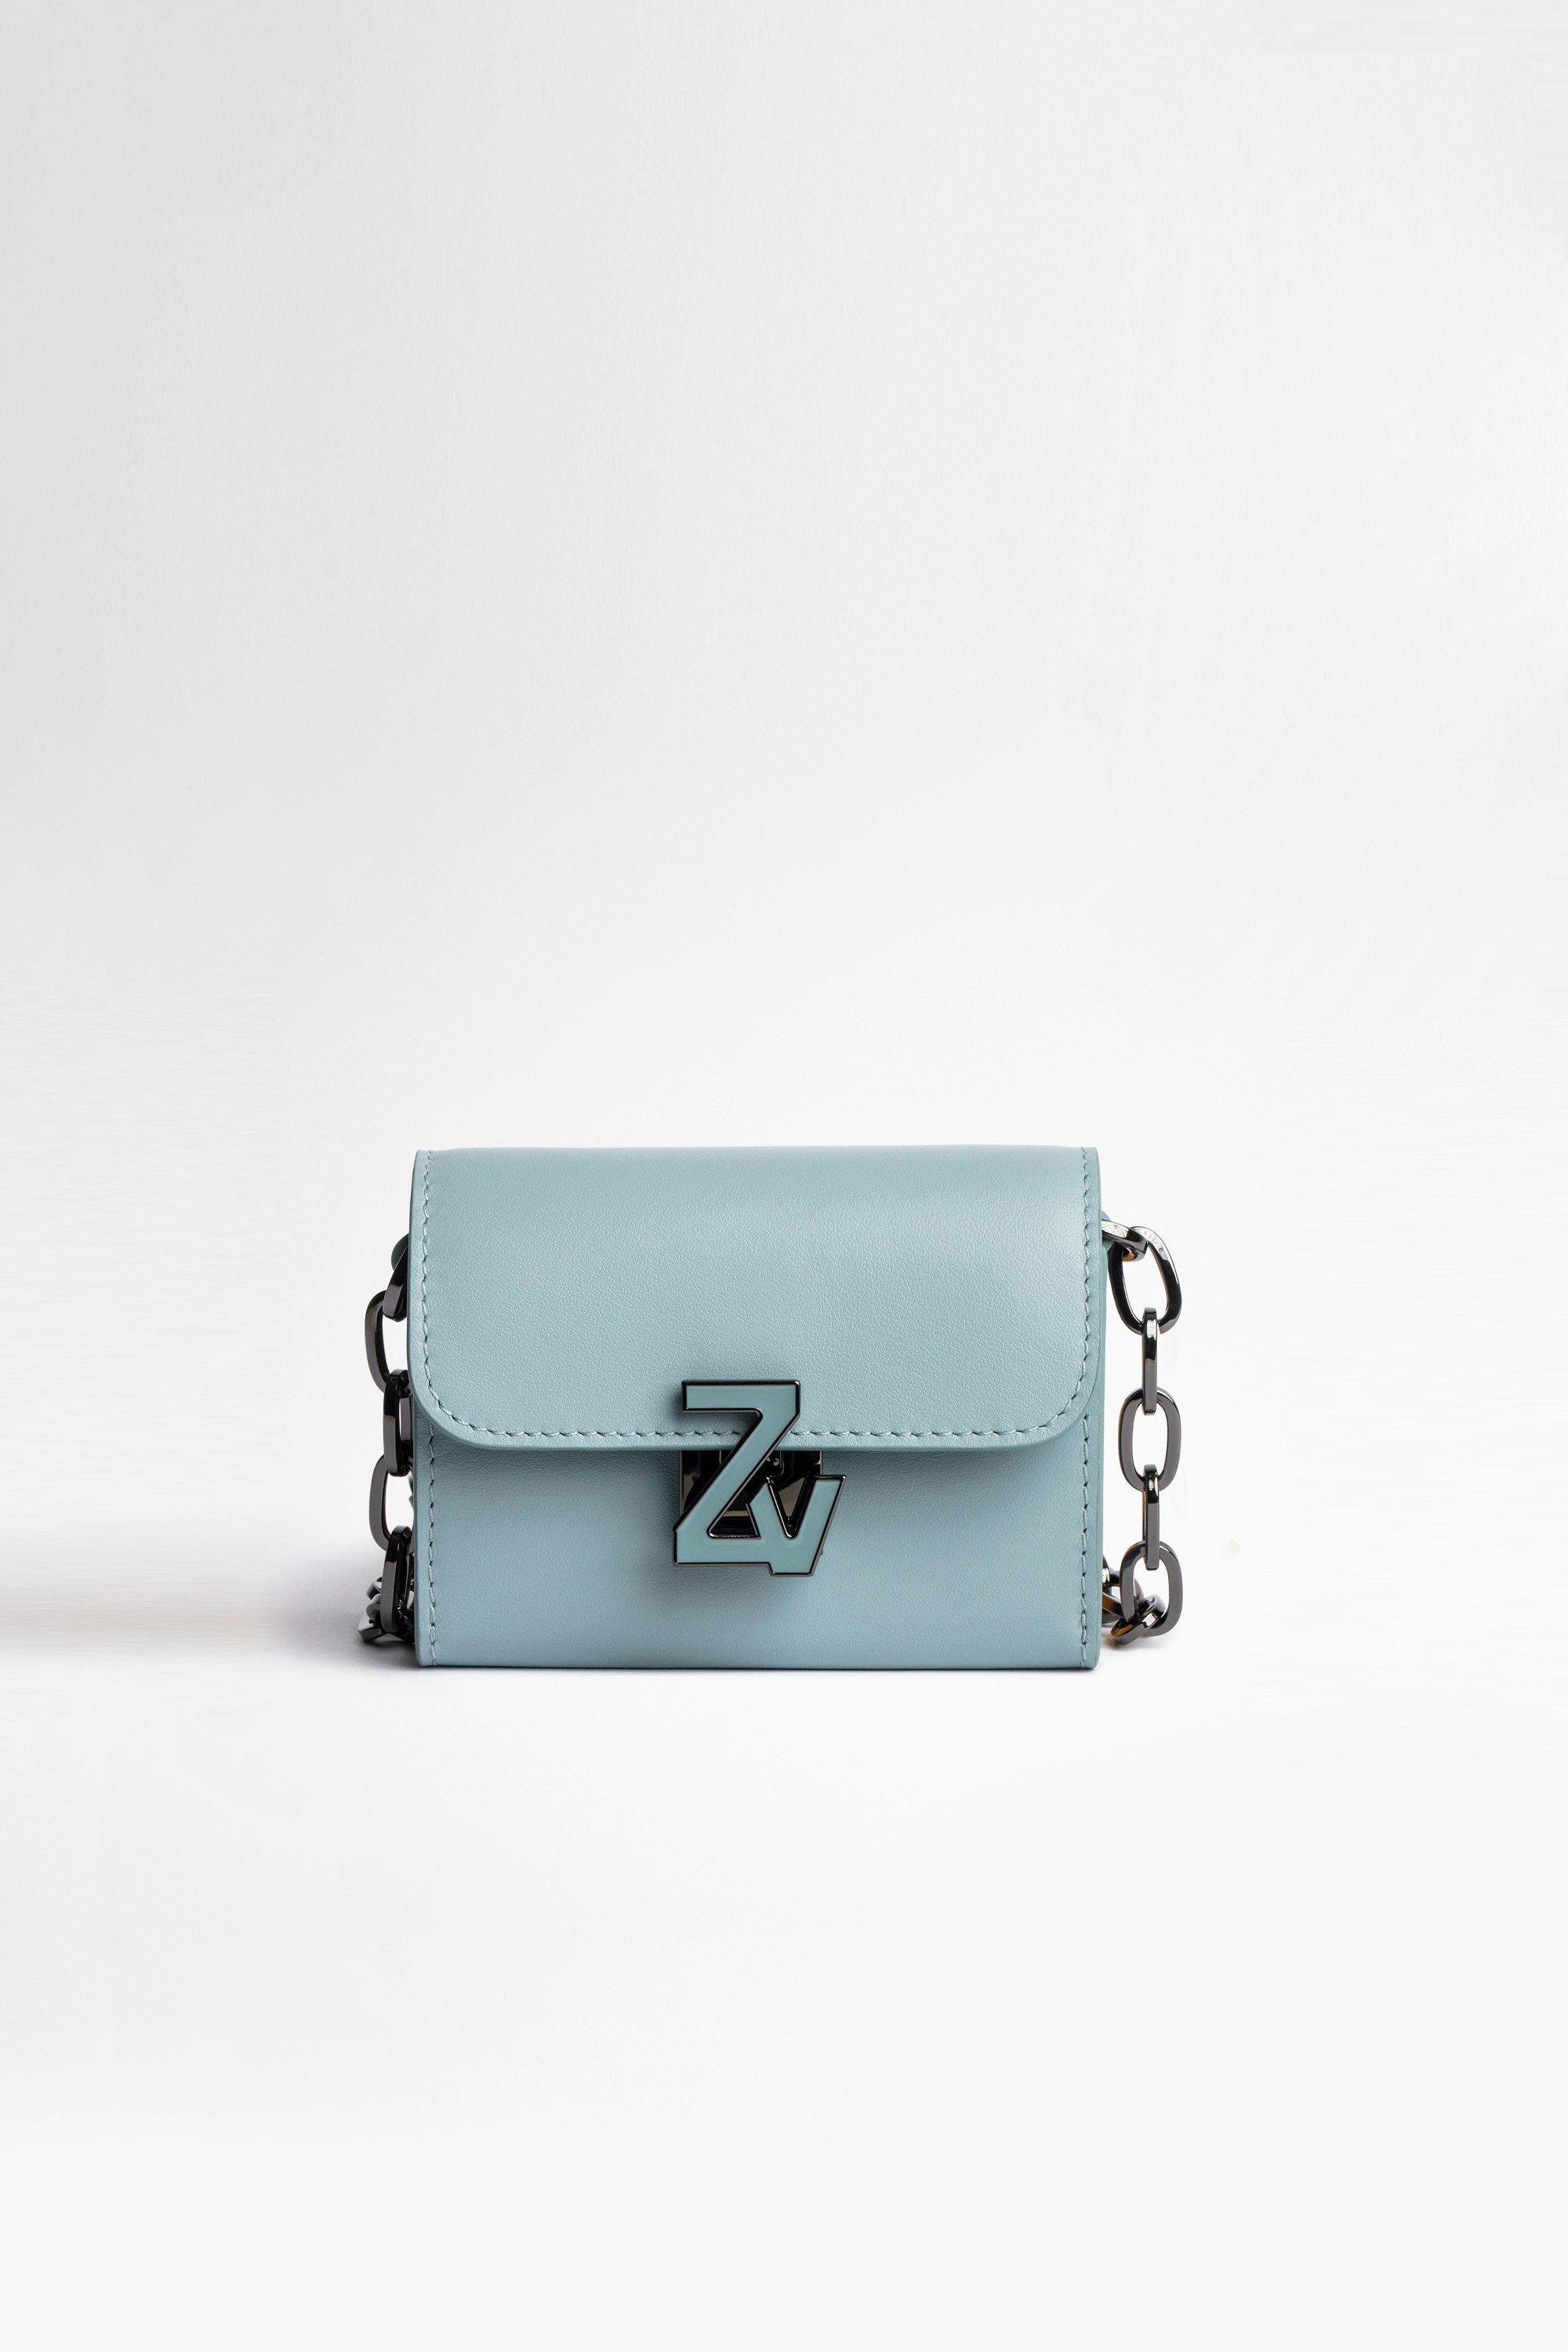 ZV Initiale Le Tiny 財布 Women's small leather wallet in sky-blue